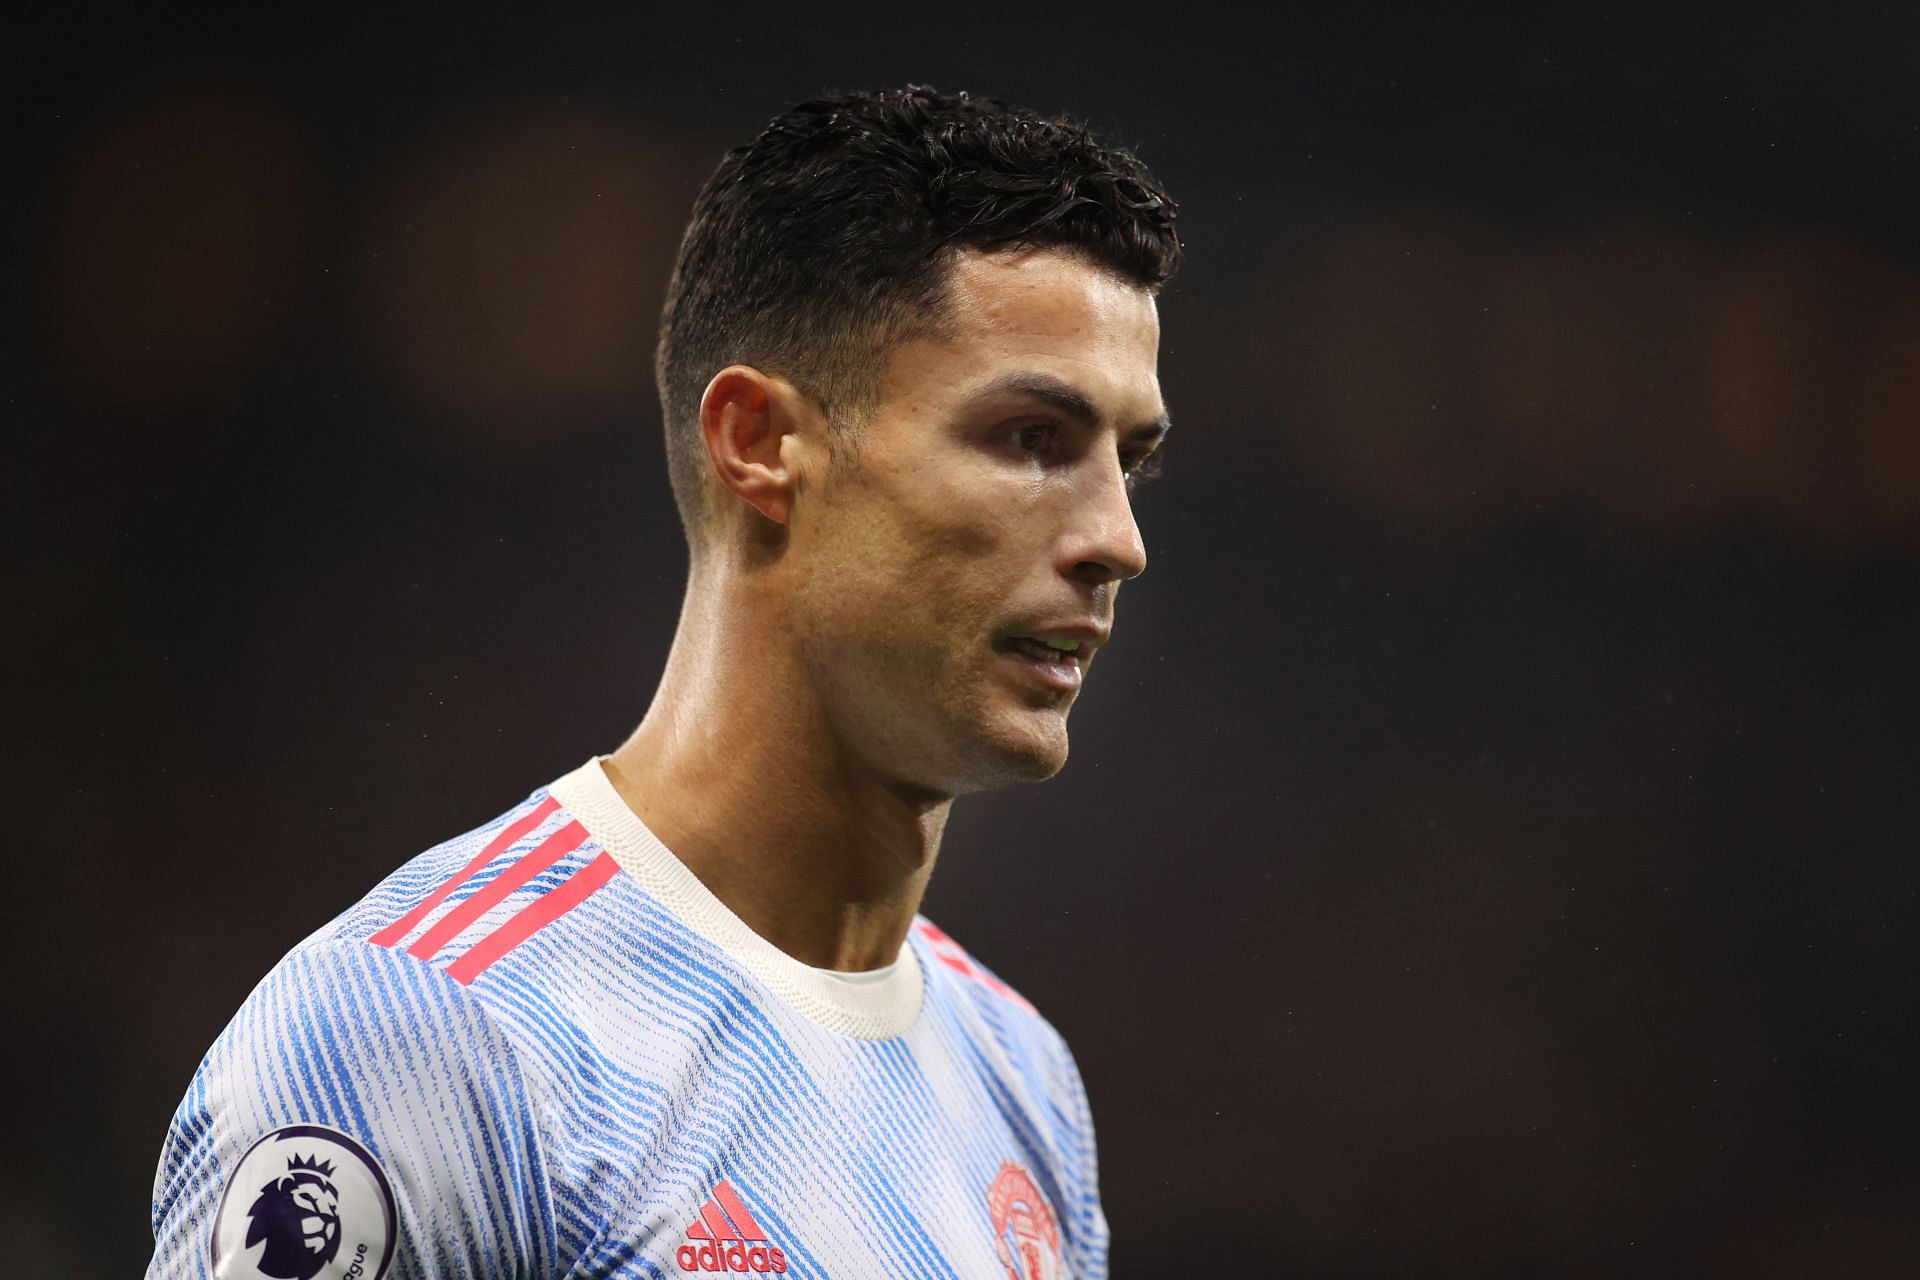 Cristiano Ronaldo&#039;s legal troubles appear to be over now.